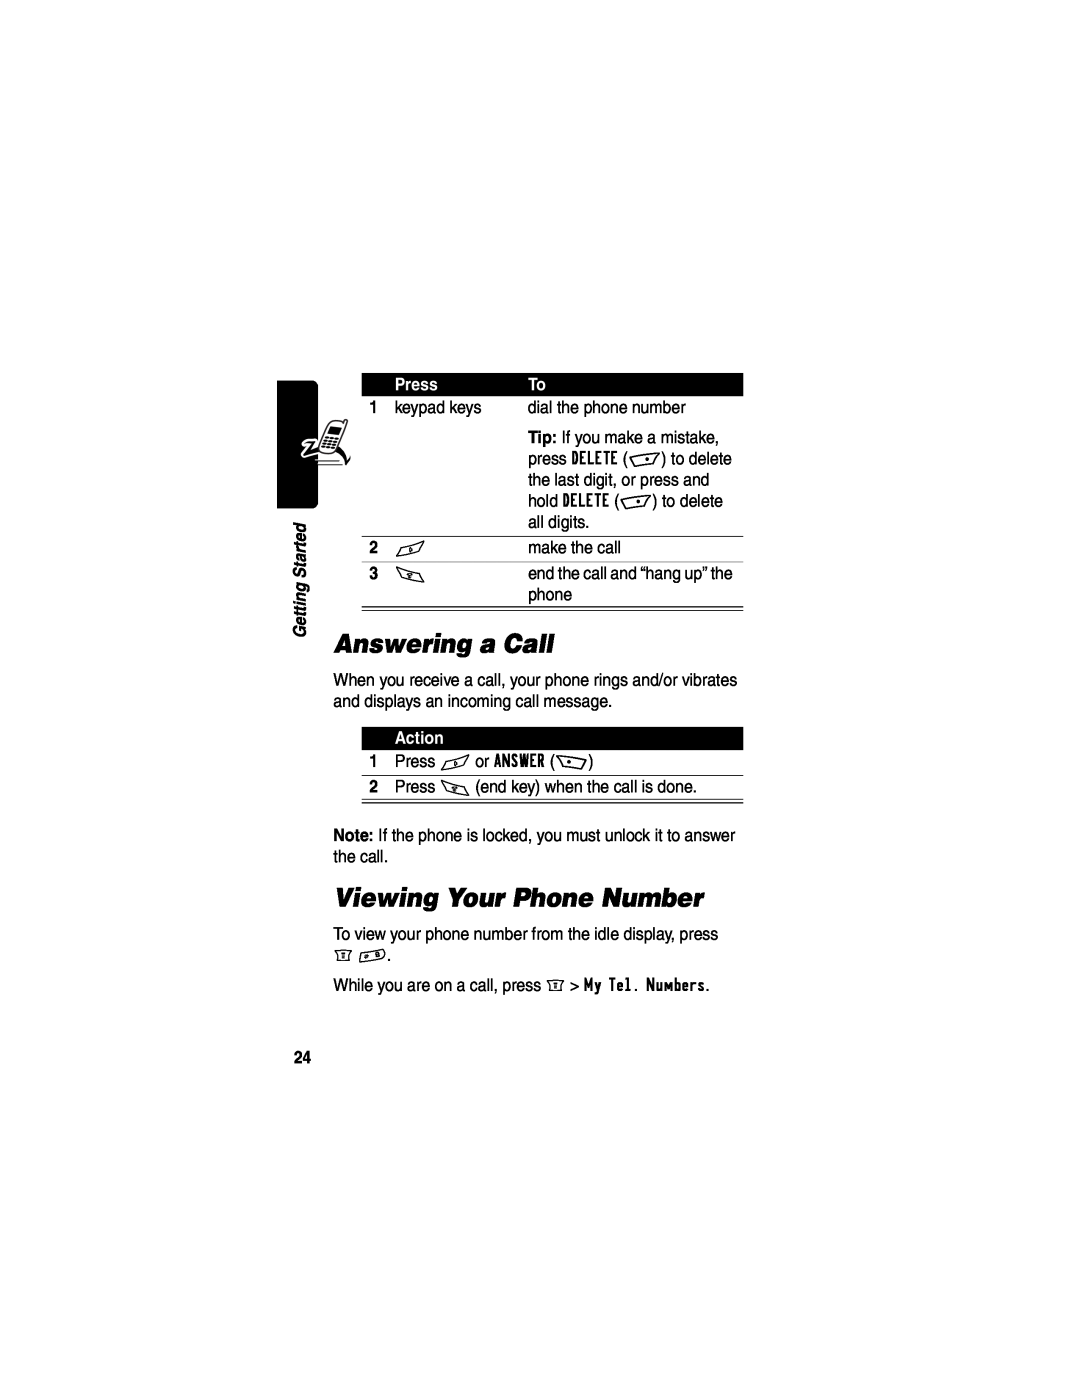 Motorola WIRELESS TELEPHONE manual Answering a Call, Viewing Your Phone Number, Press, Action 